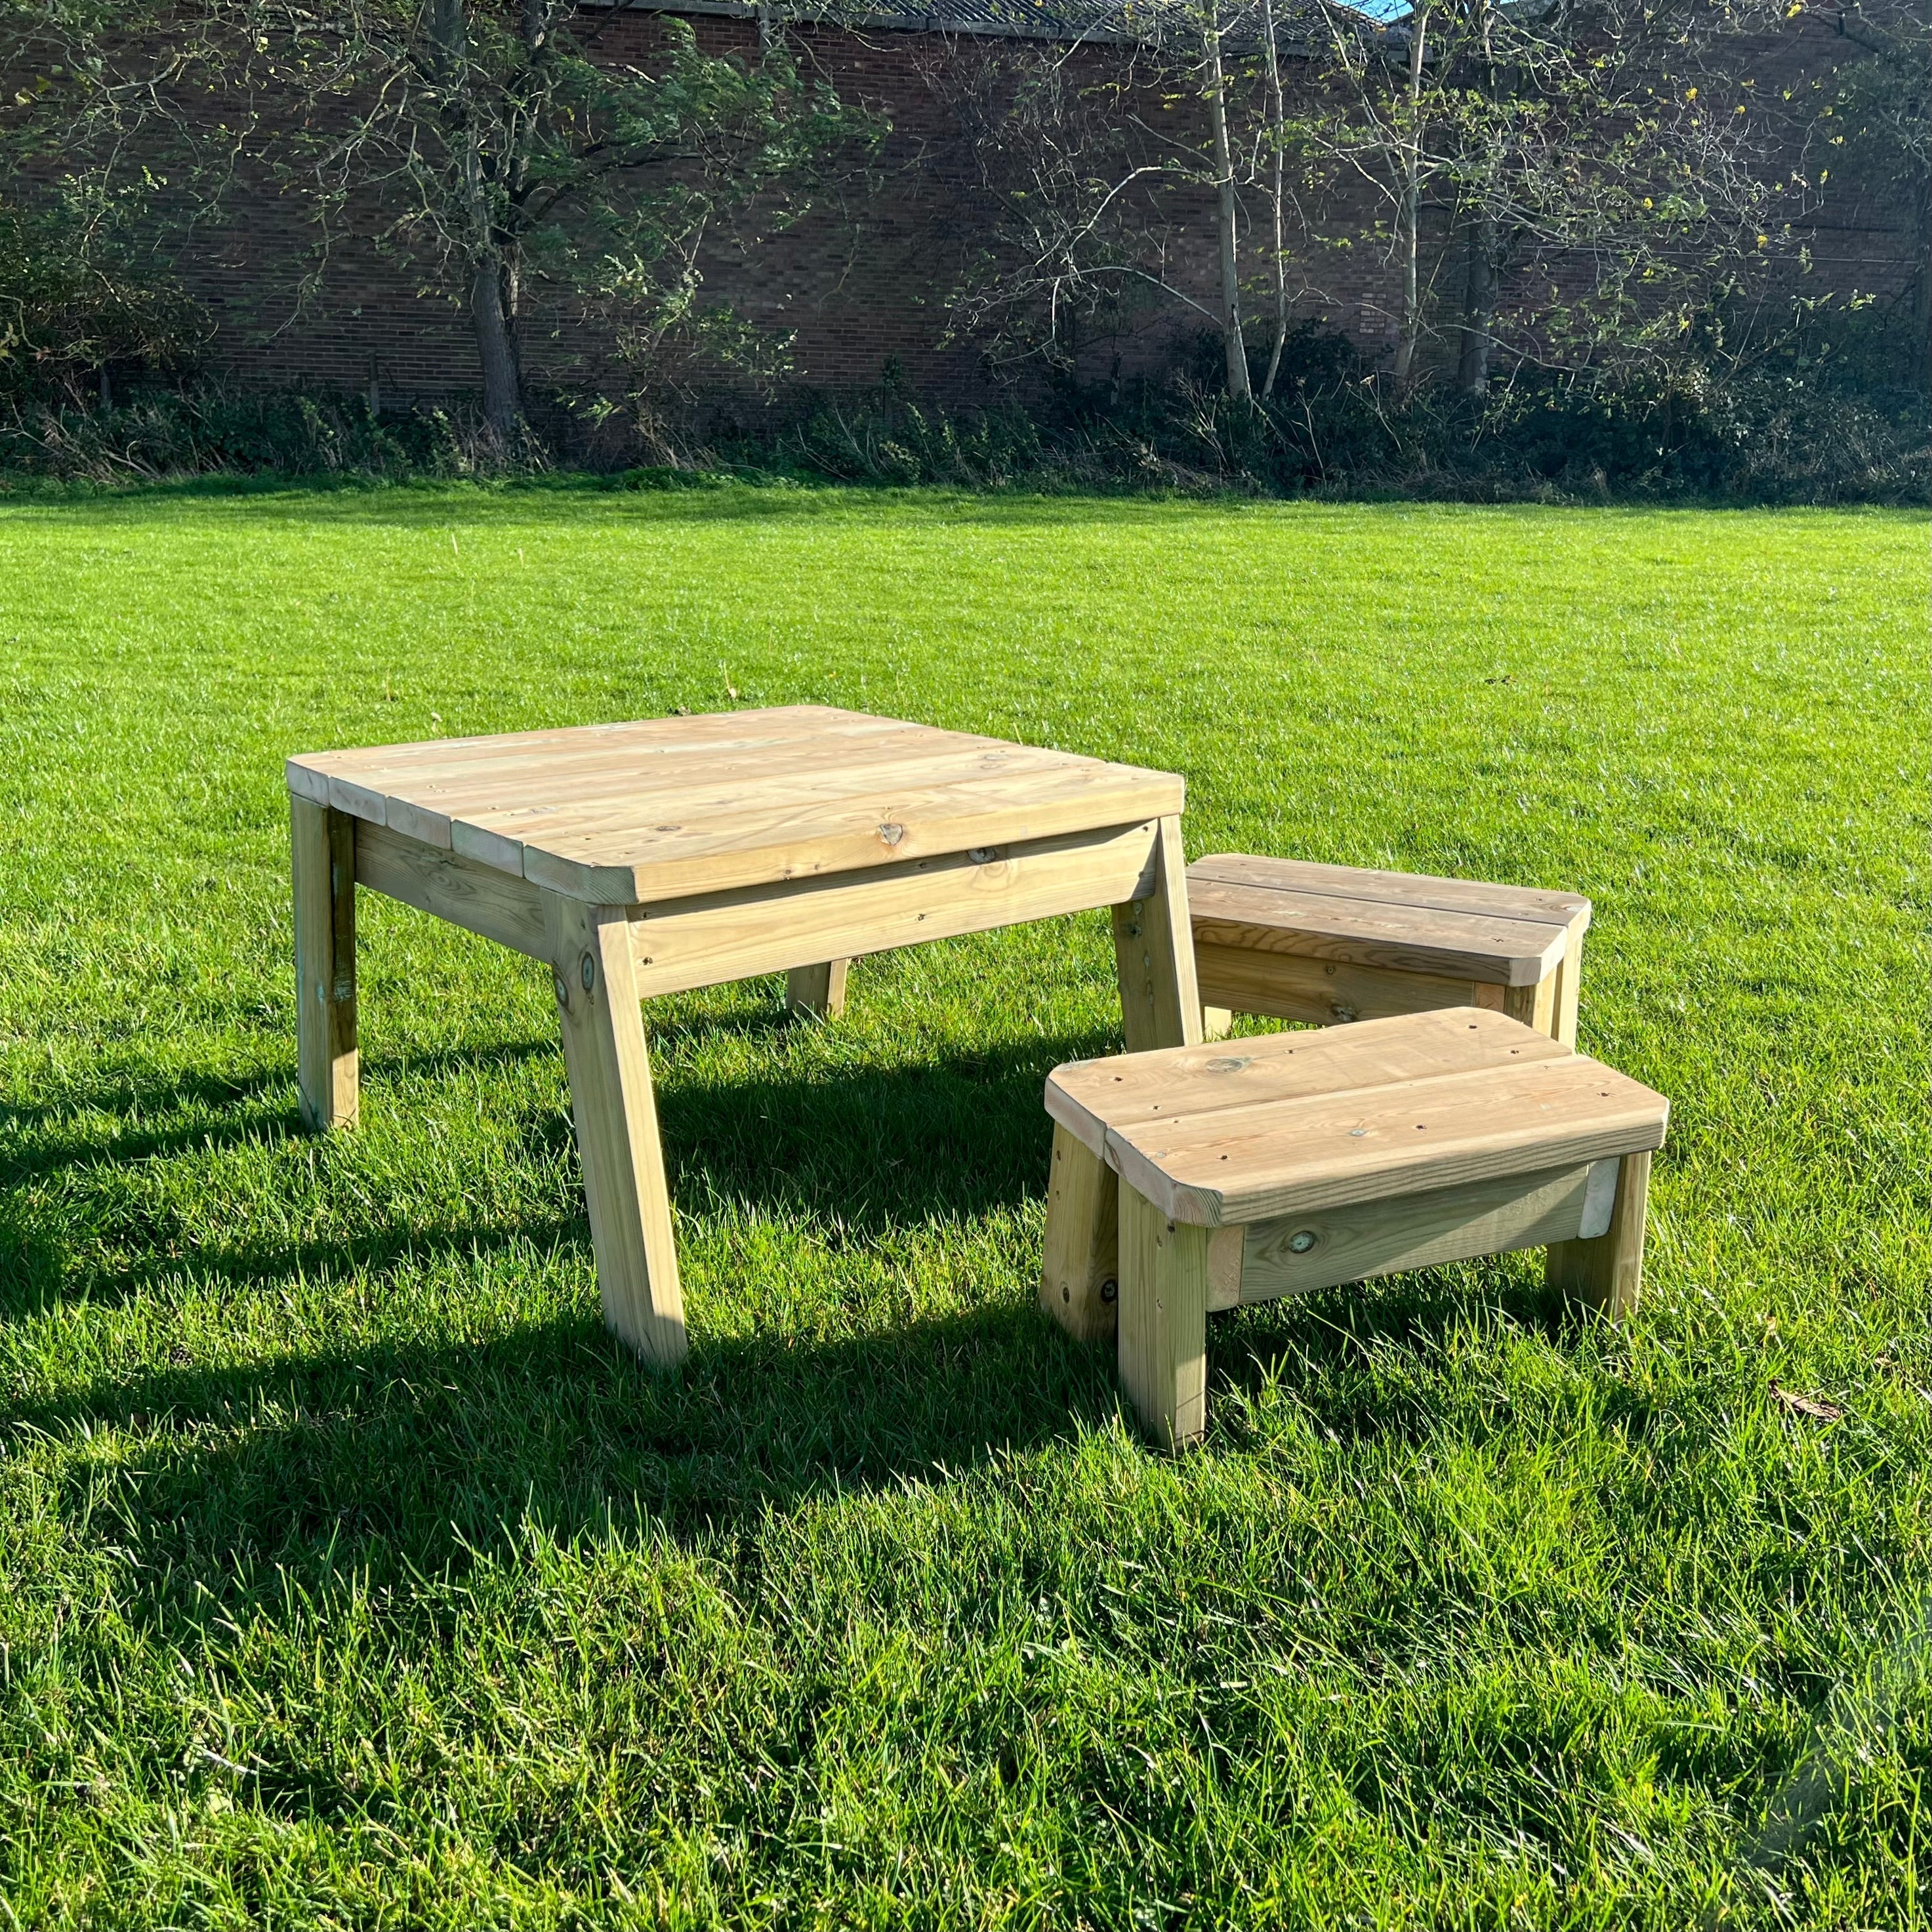 Children's Outdoor Mini Table and Benches, Every early years, educational environment needs outdoor seating! The Children's Outdoor Mini Table and Benches are suitable to accommodate at least 2 children at once. It is the perfect seating set to enjoy lunchtime outdoors.Robust and built in a square shape, this resource can be used in multiple outdoor lessons. The Children's Outdoor Mini Table and Benches is made from sustainable FSC Pressure Treated Redwood Timber. Delivery 4-6 weeks Delivered fully Assemble